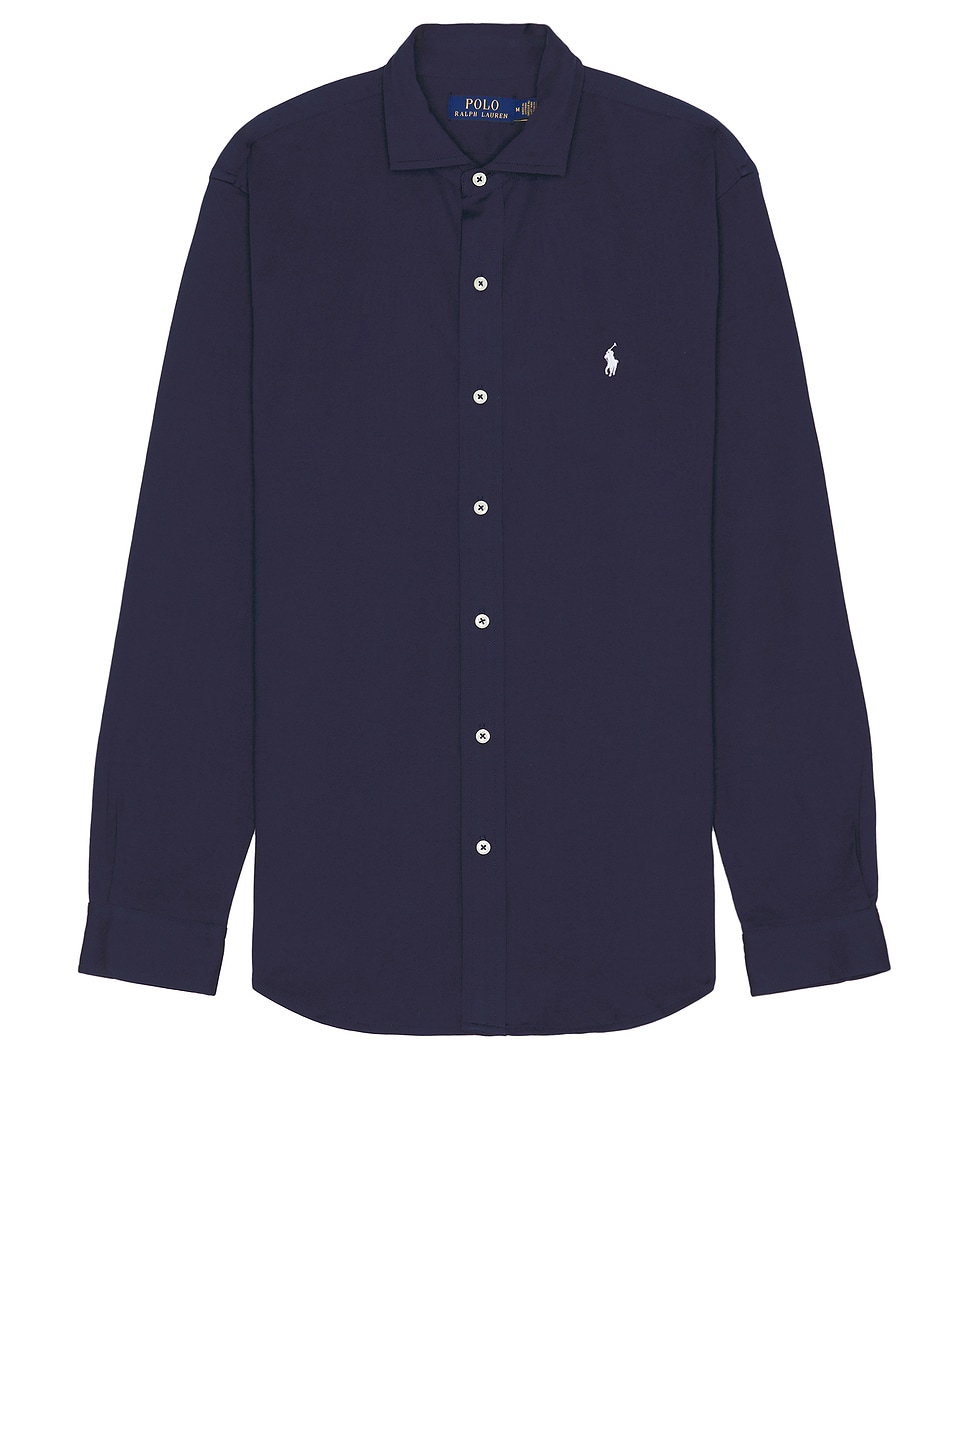 Image 1 of Polo Ralph Lauren Knit Sport Shirt in Cruise Navy